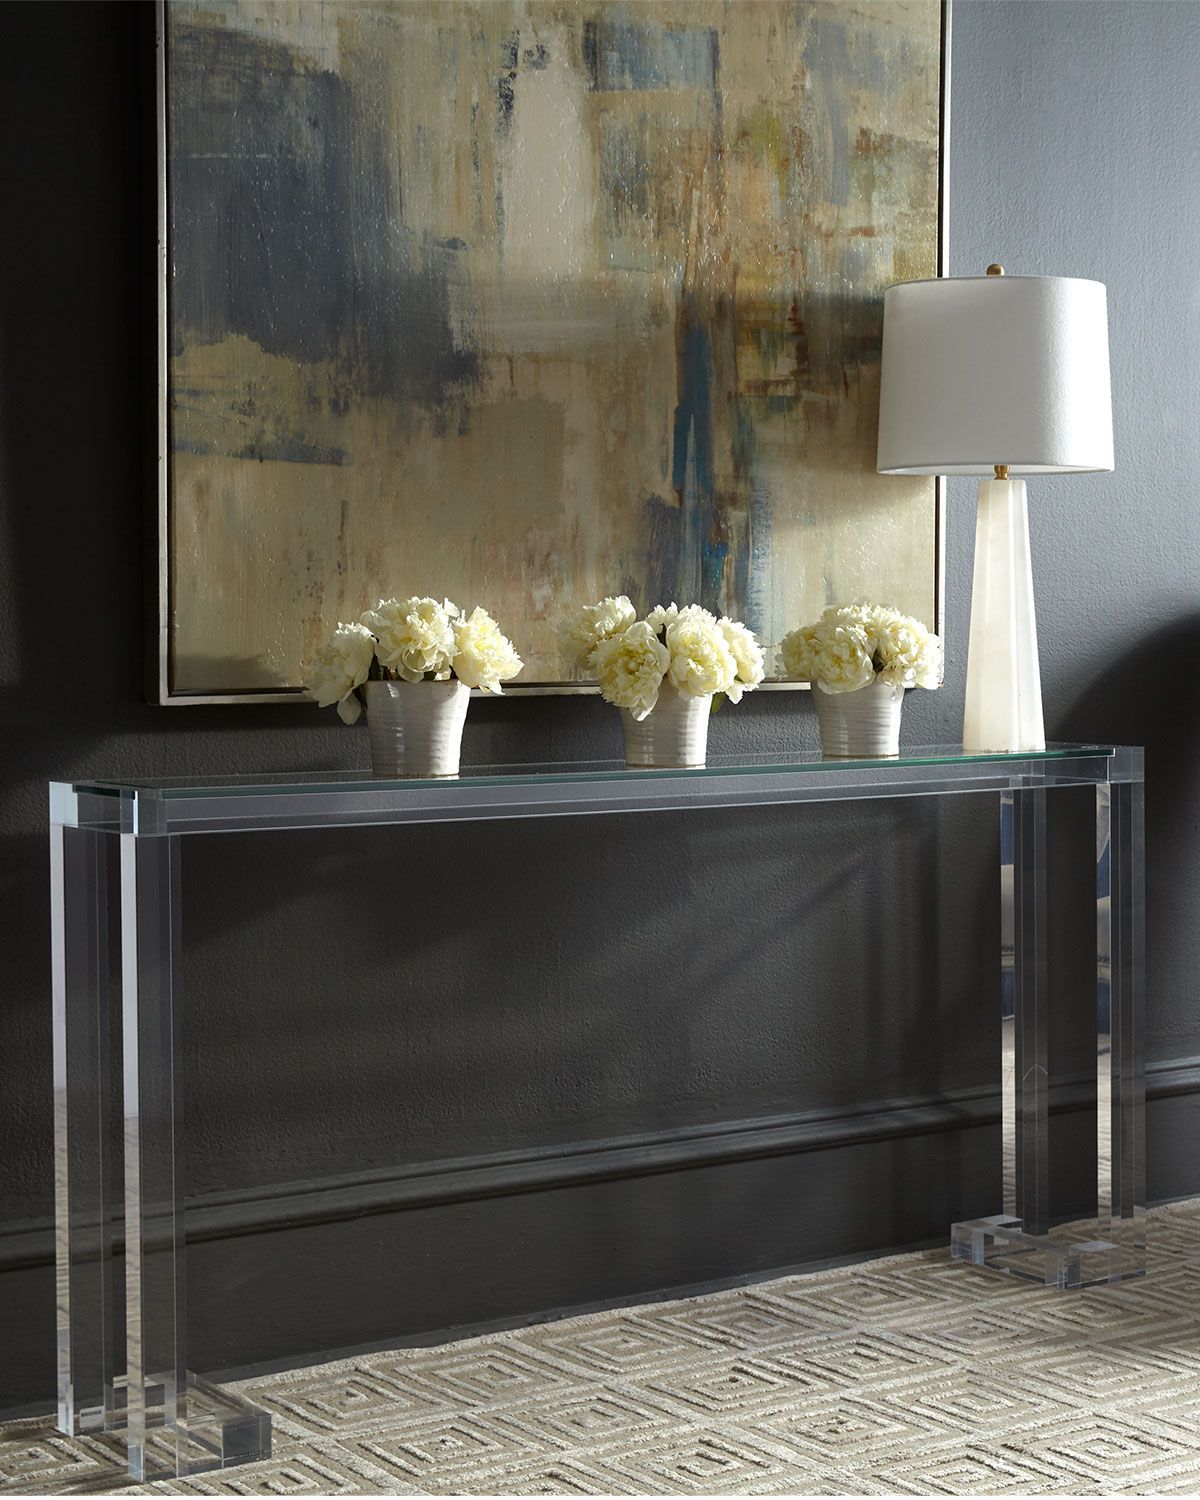 Interlude Home Ava Sofa Table | Console Table Decorating, Acrylic With Regard To Clear Acrylic Console Tables (View 10 of 20)